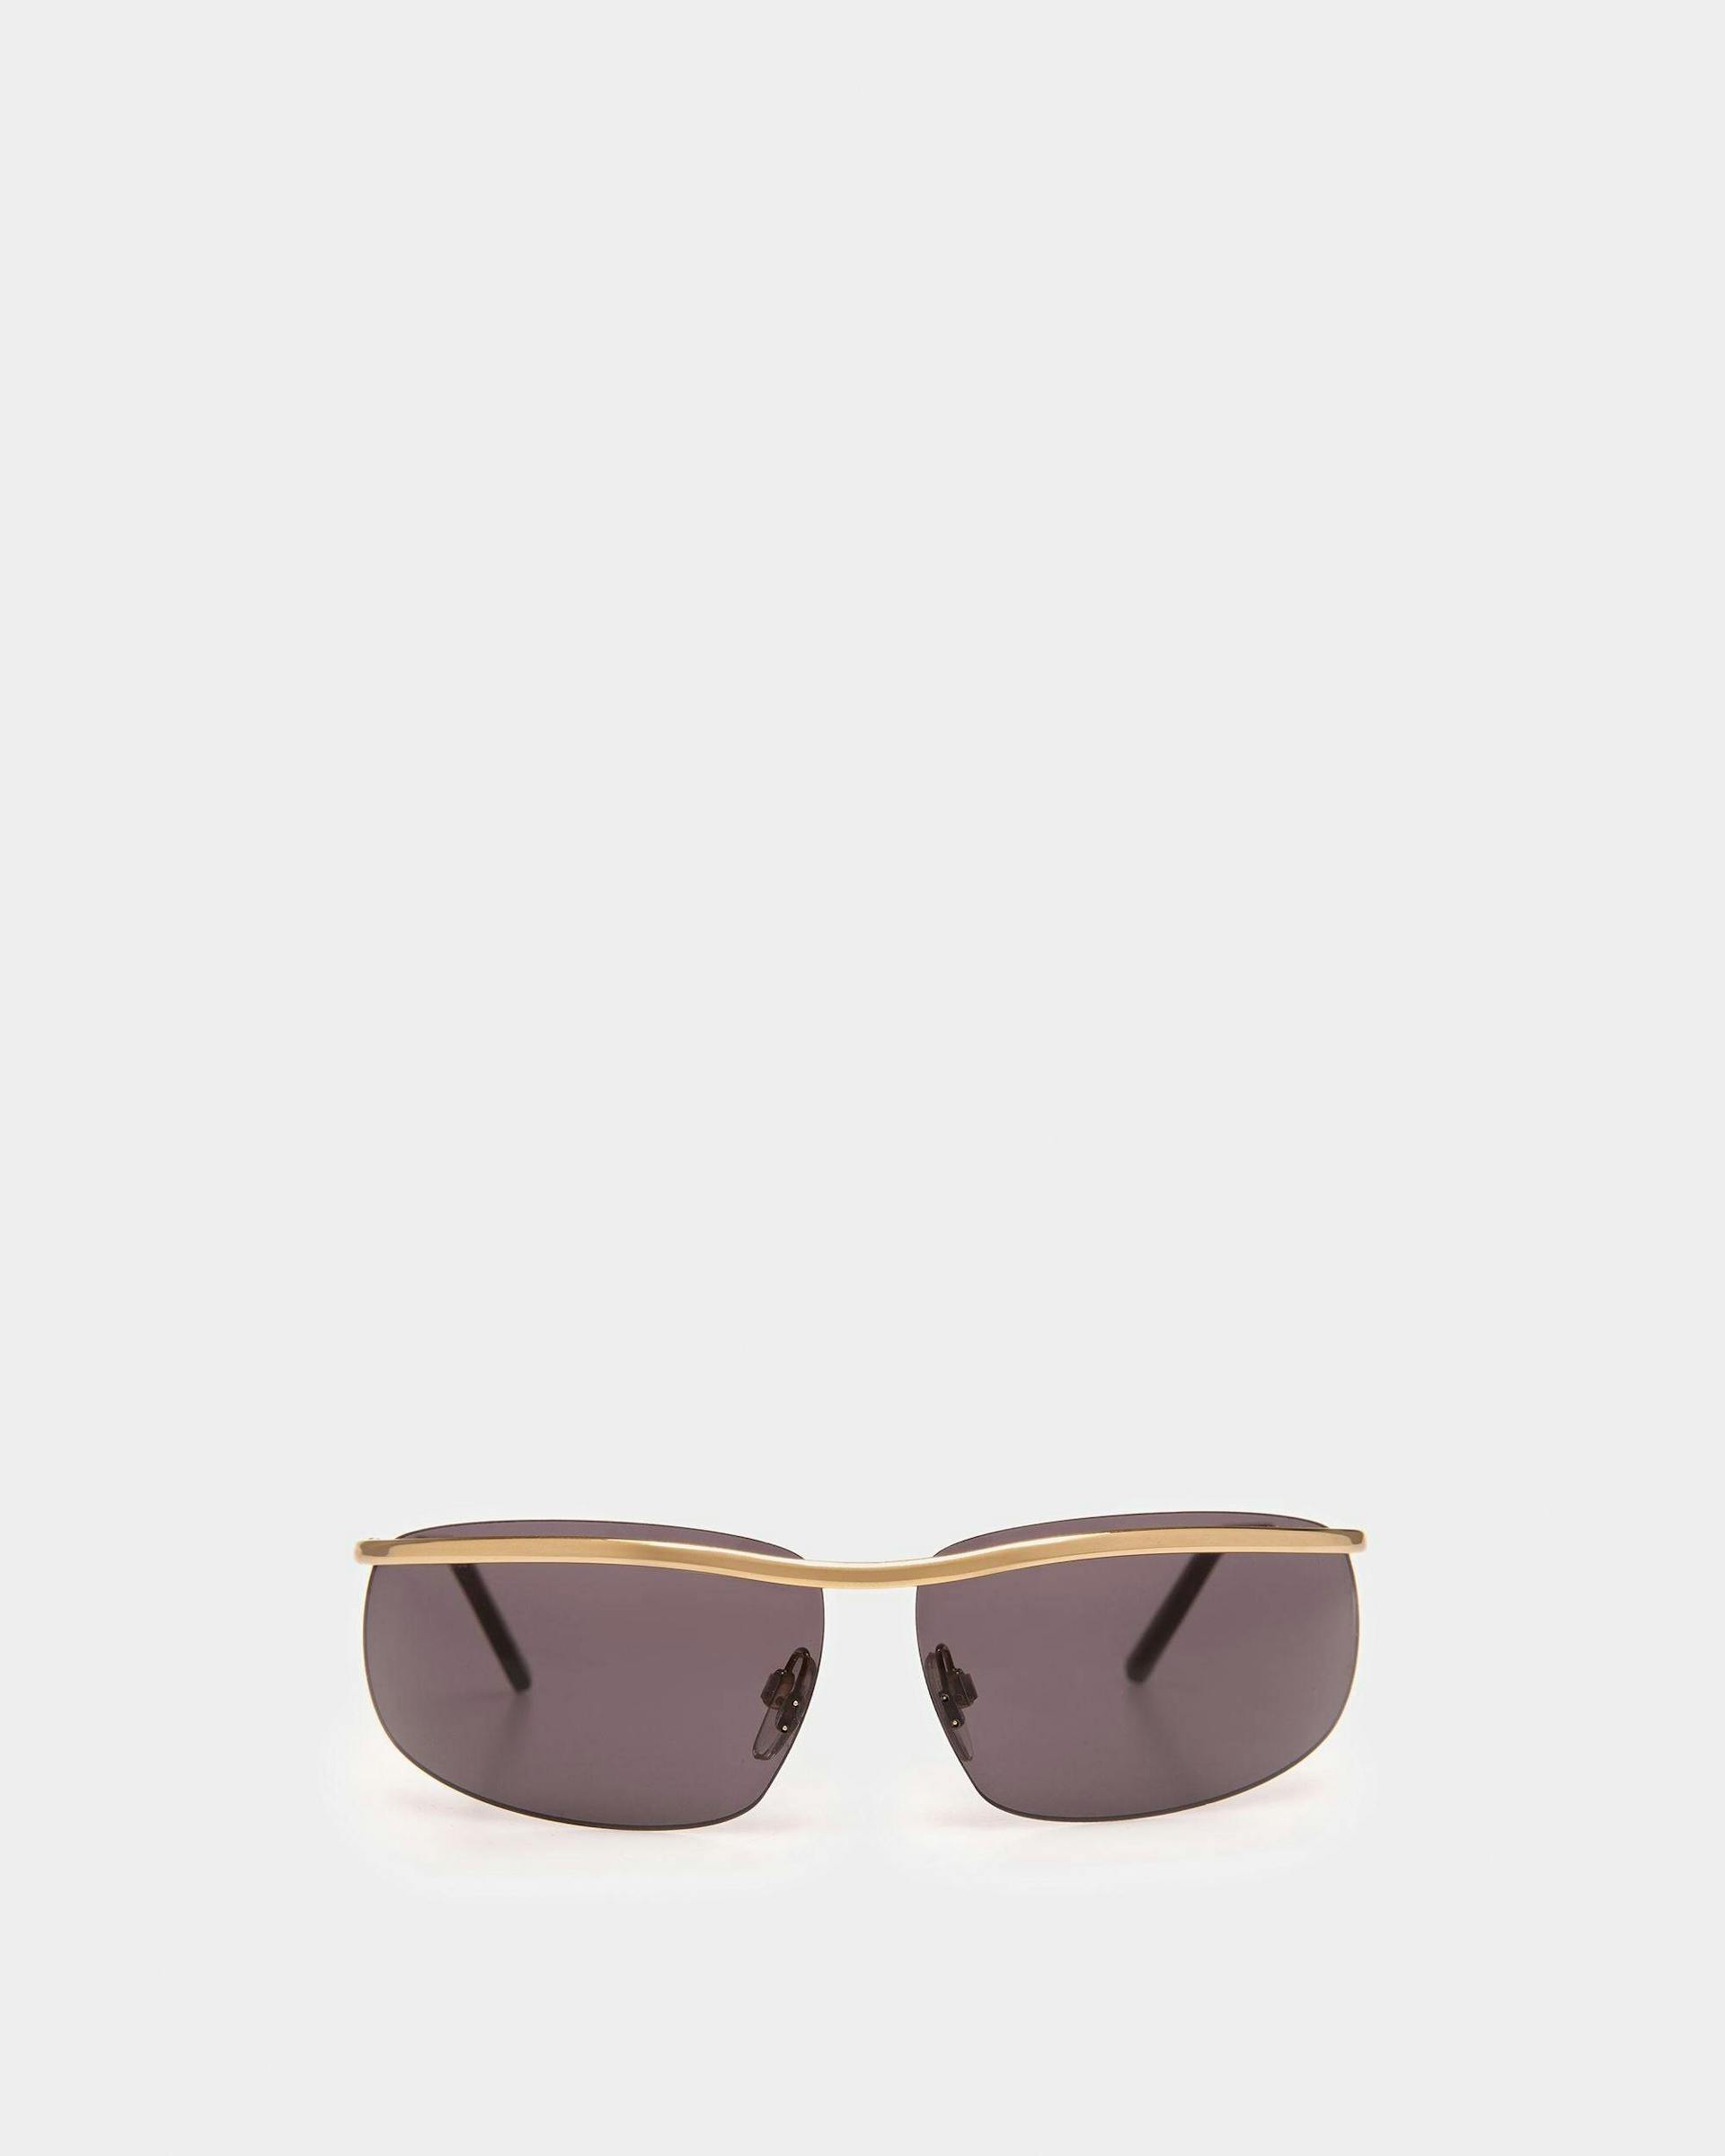 SUNGLASSES - OTHER - Bally - 01